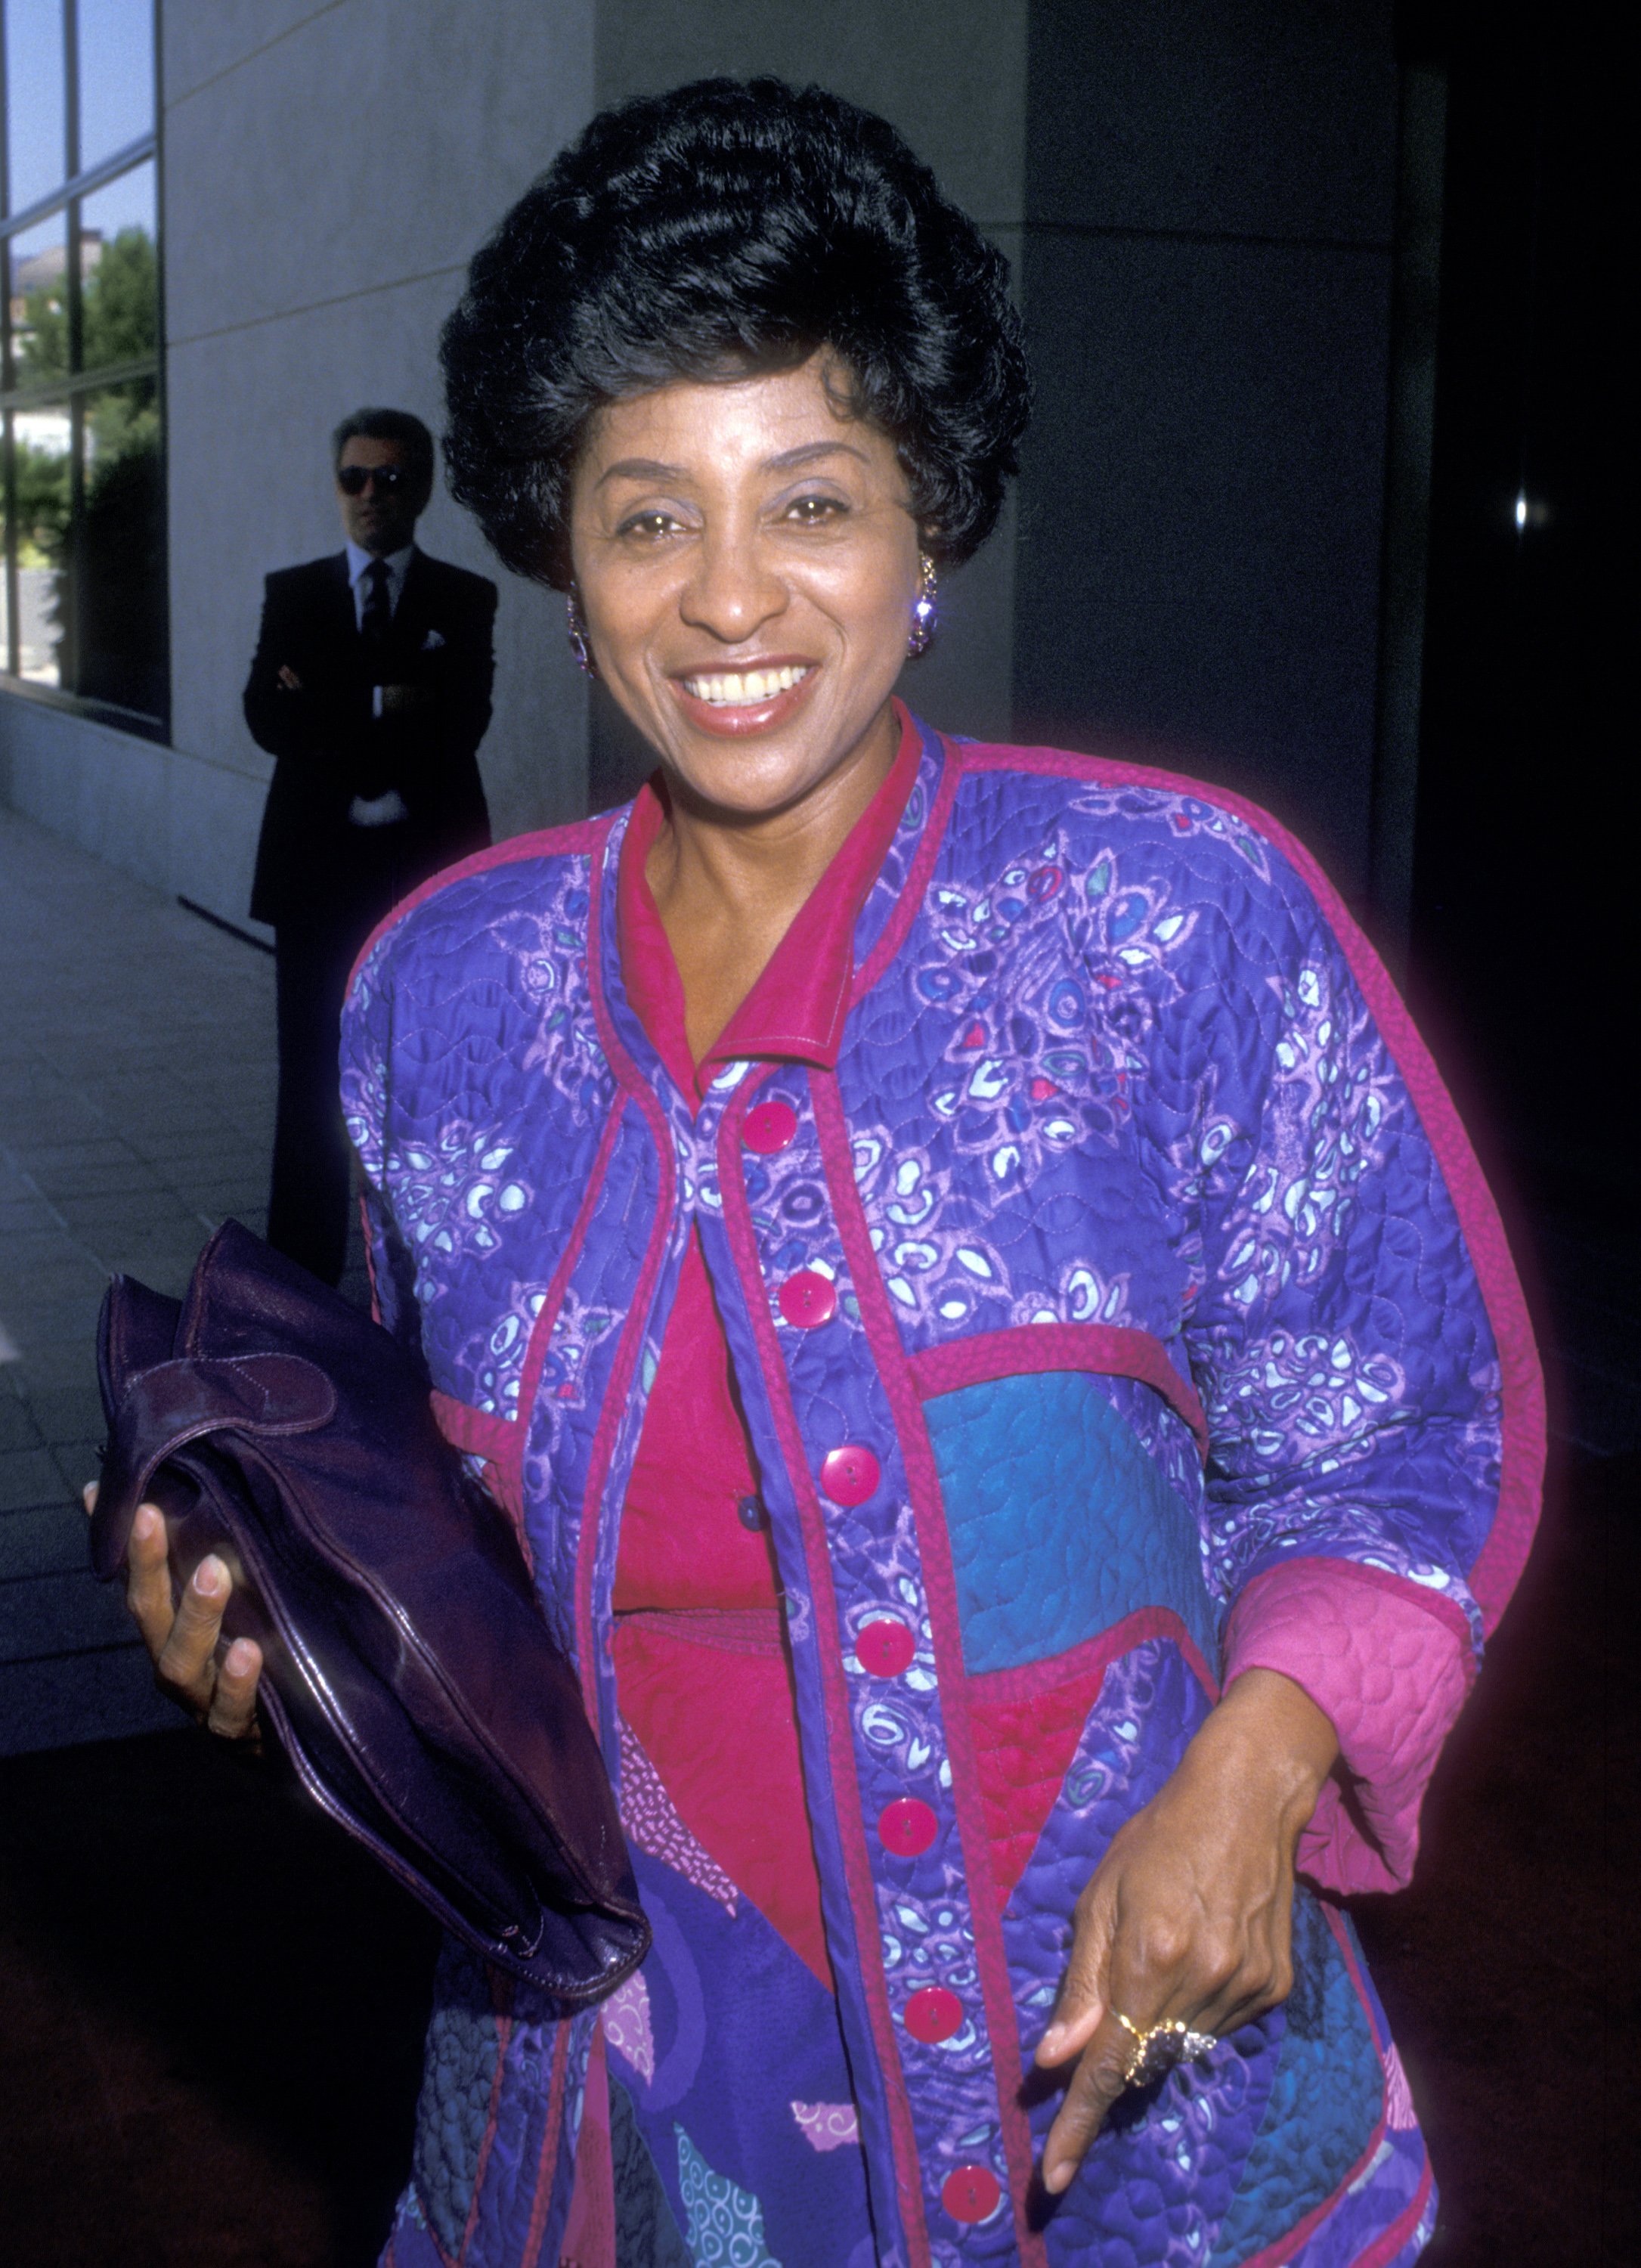 Marla Gibbs at NBC's Affiliates Party at The Registry Hotel in Universal City, California on August 7, 1988 | Photo: Getty Images